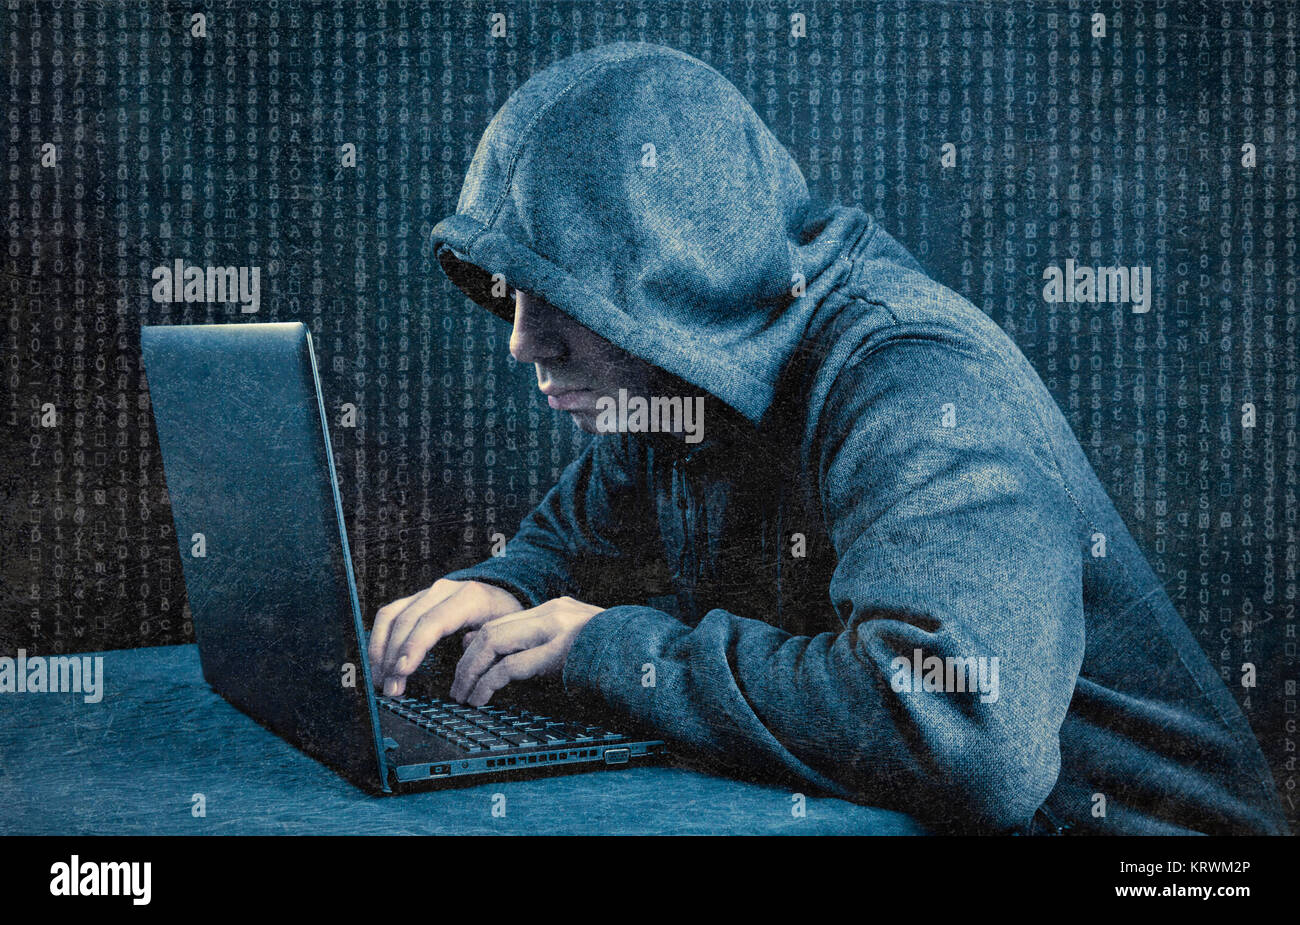 Hooded computer hacker with laptop Stock Photo